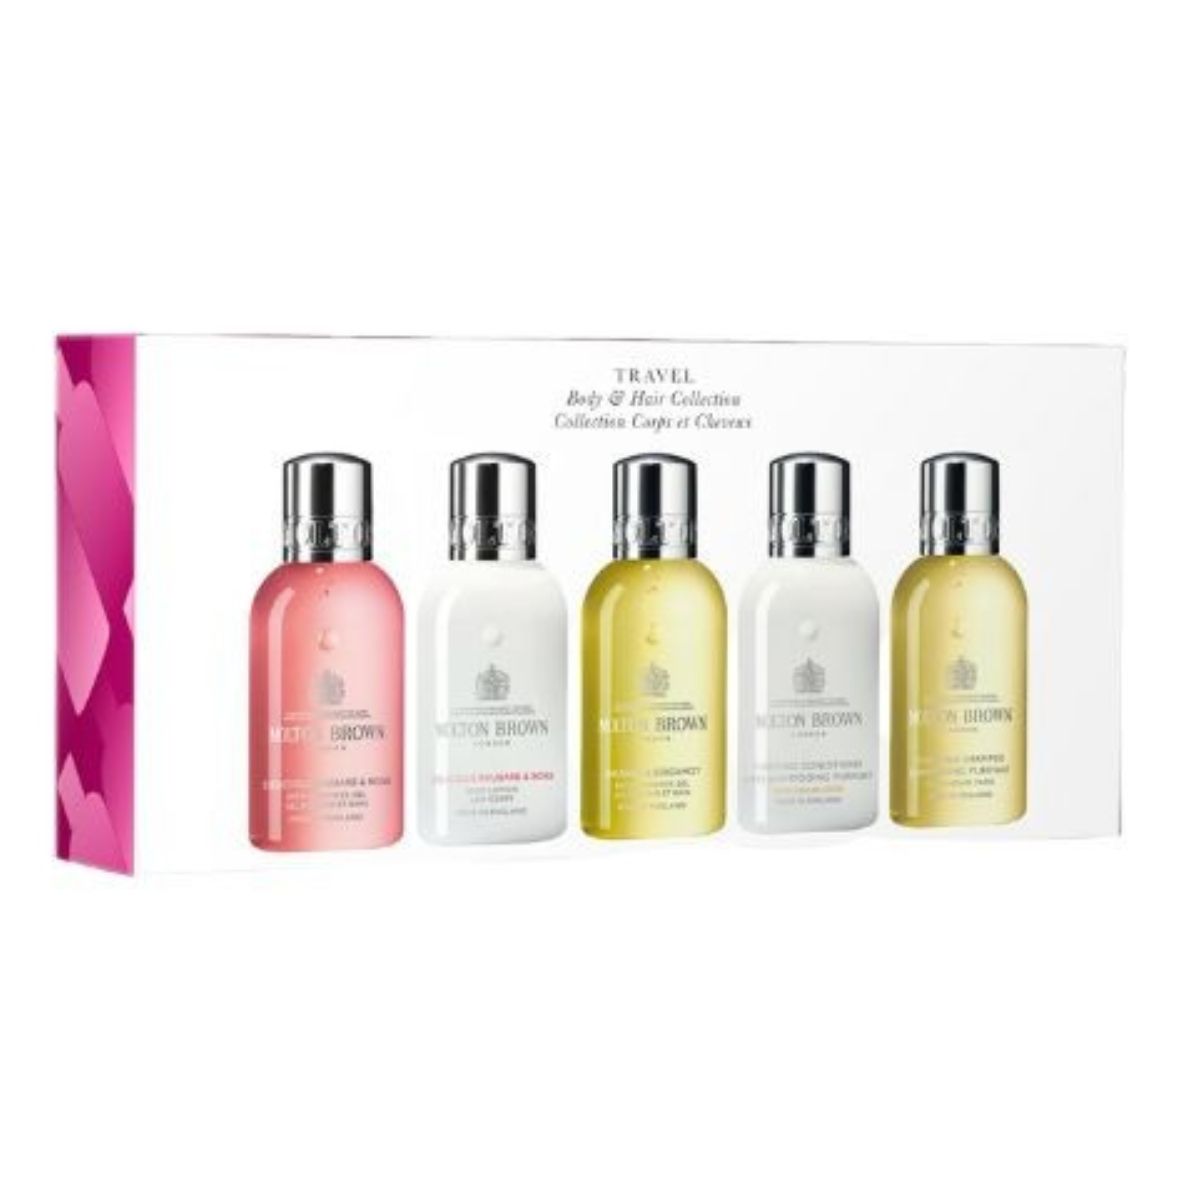 Molton Brown Travel Body & Hair Collection SAVE 25%